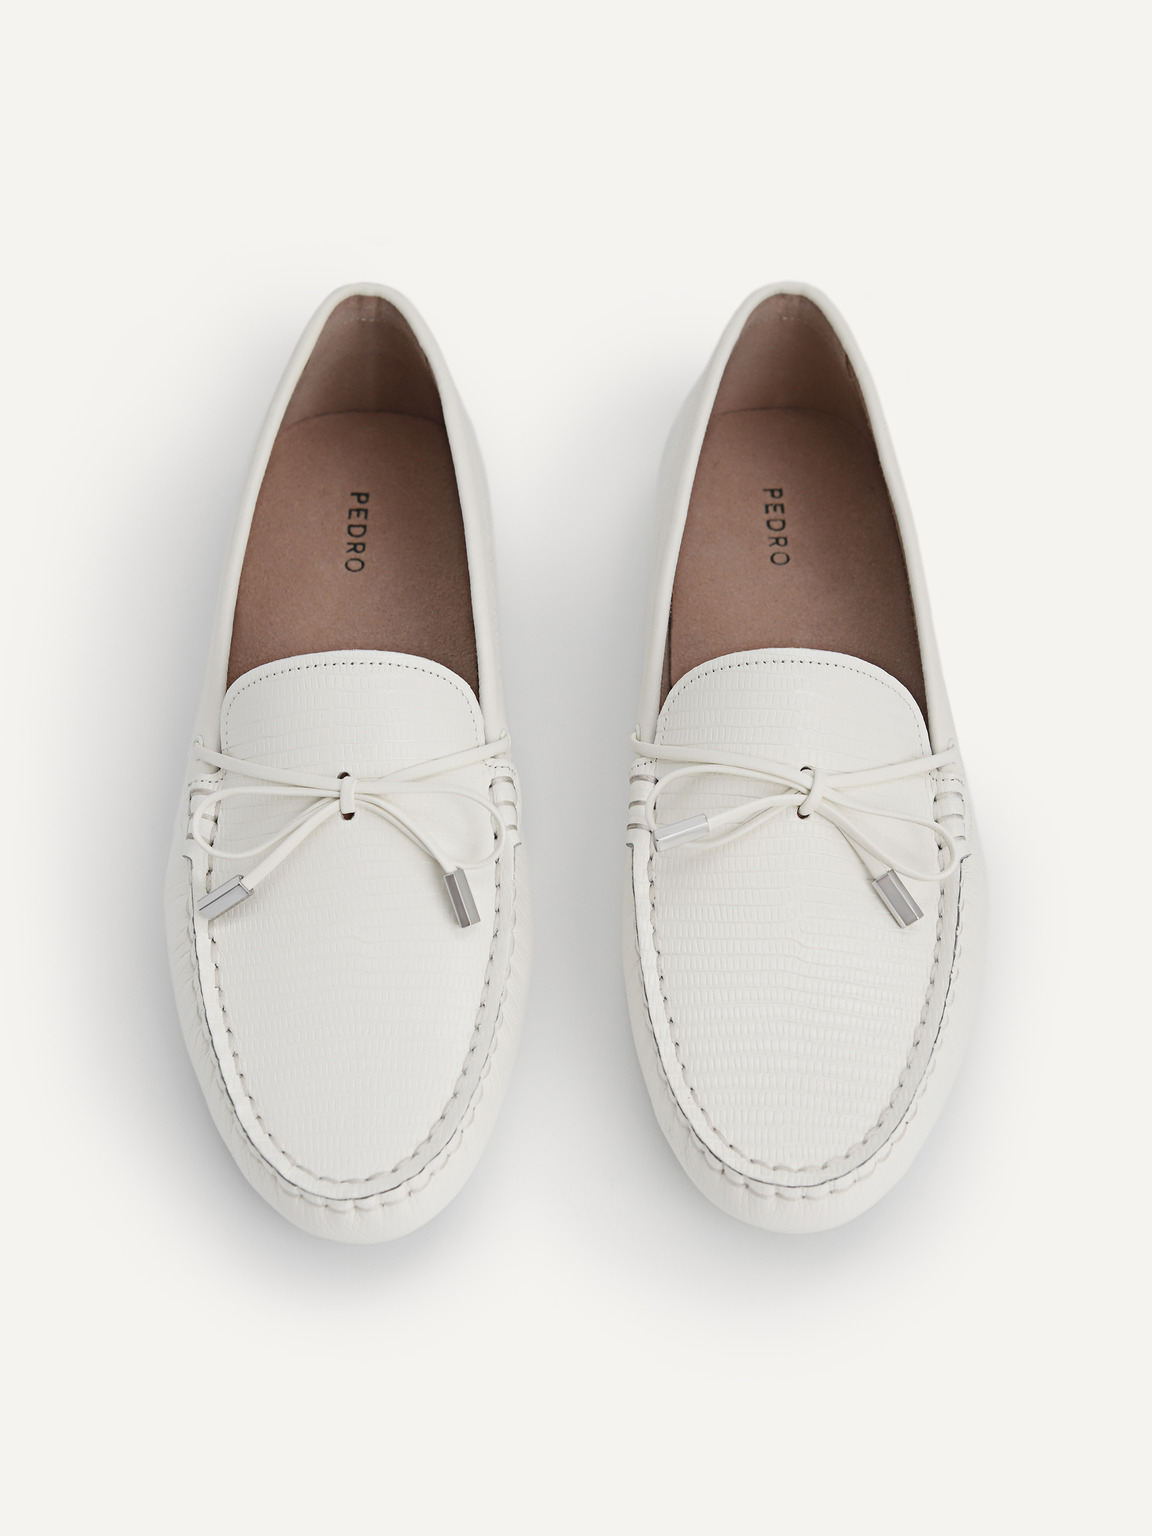 Lizard-effect Leather Bow Moccasins, Chalk